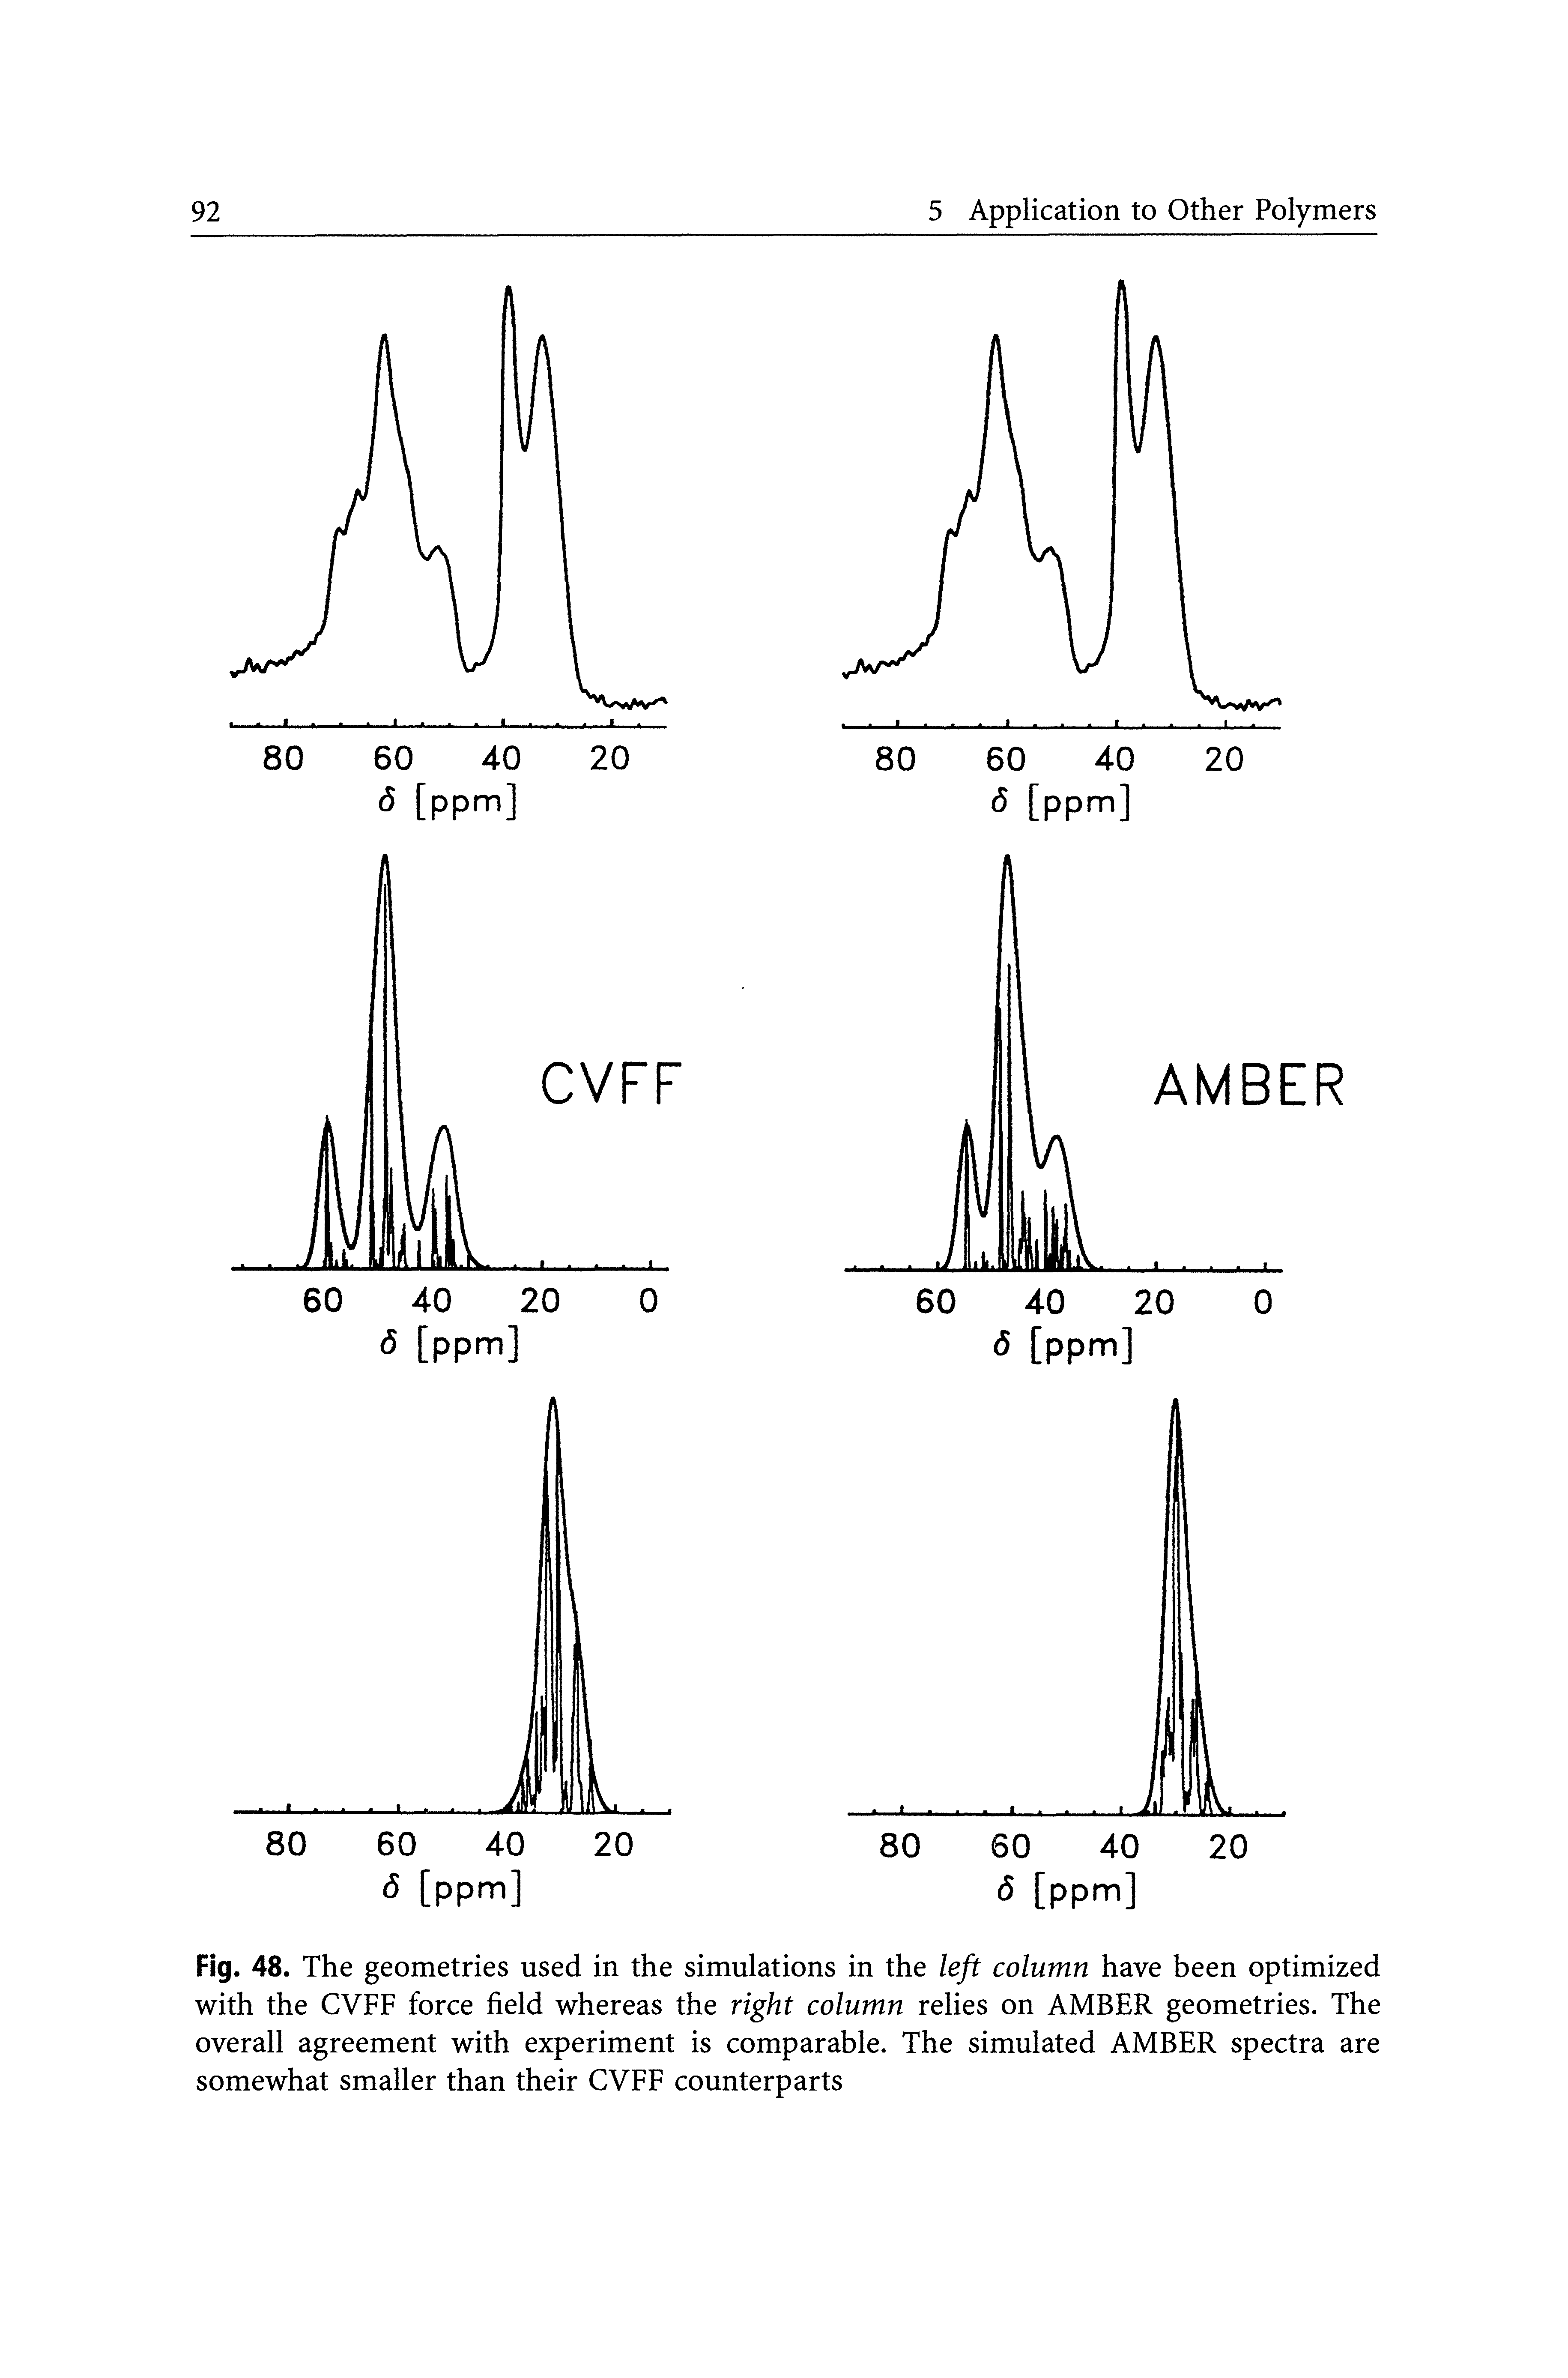 Fig. 48. The geometries used in the simulations in the left column have been optimized with the CVFF force field whereas the right column relies on AMBER geometries. The overall agreement with experiment is comparable. The simulated AMBER spectra are somewhat smaller than their CVFF counterparts...